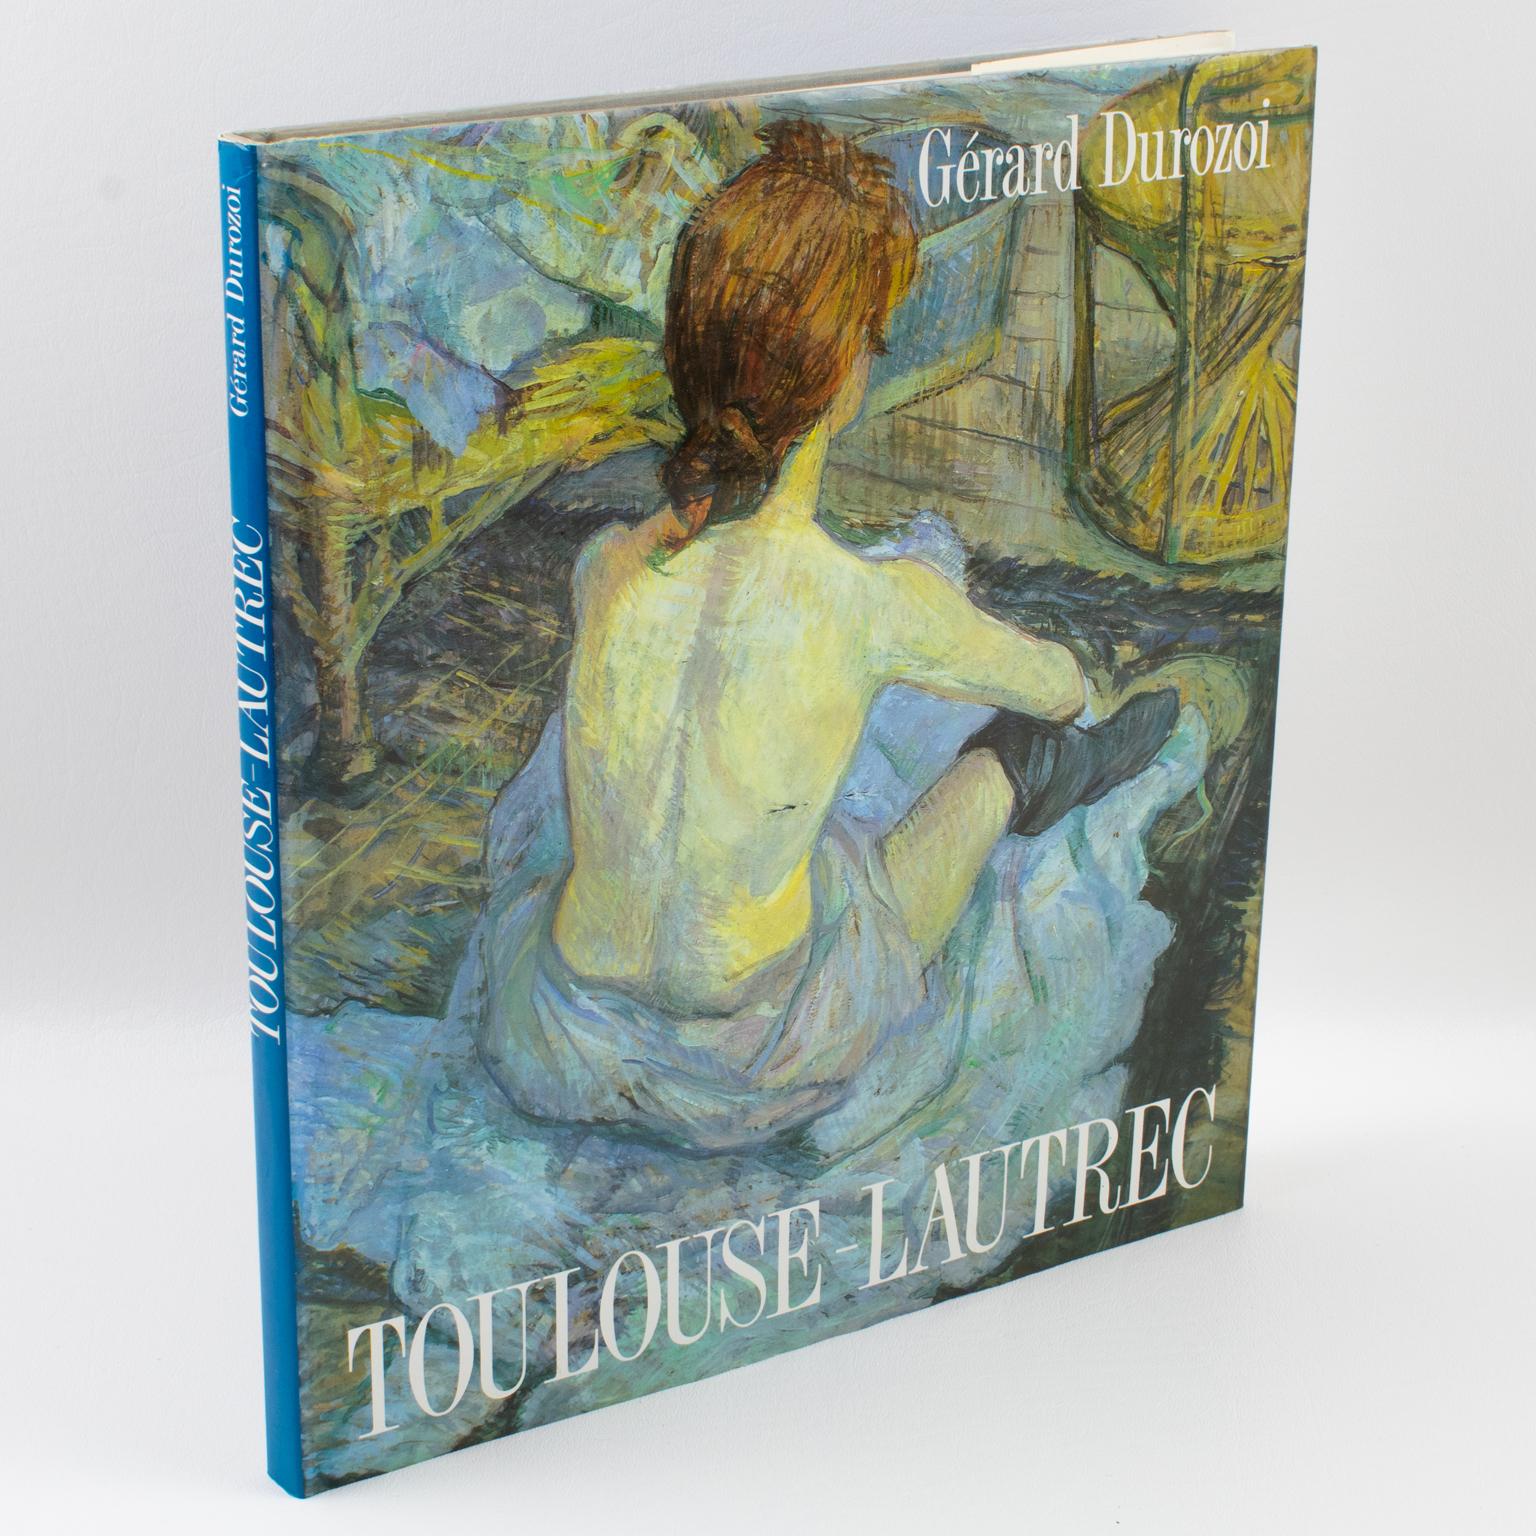 Toulouse-Lautrec, French book by Gerard Dorozoi, 1992.
Henri de Toulouse-Lautrec (1864 - 1901) is almost unique among artists because he became as famous for his appearance and personality as his art. The circumstances of Toulouse-Lautrec's life